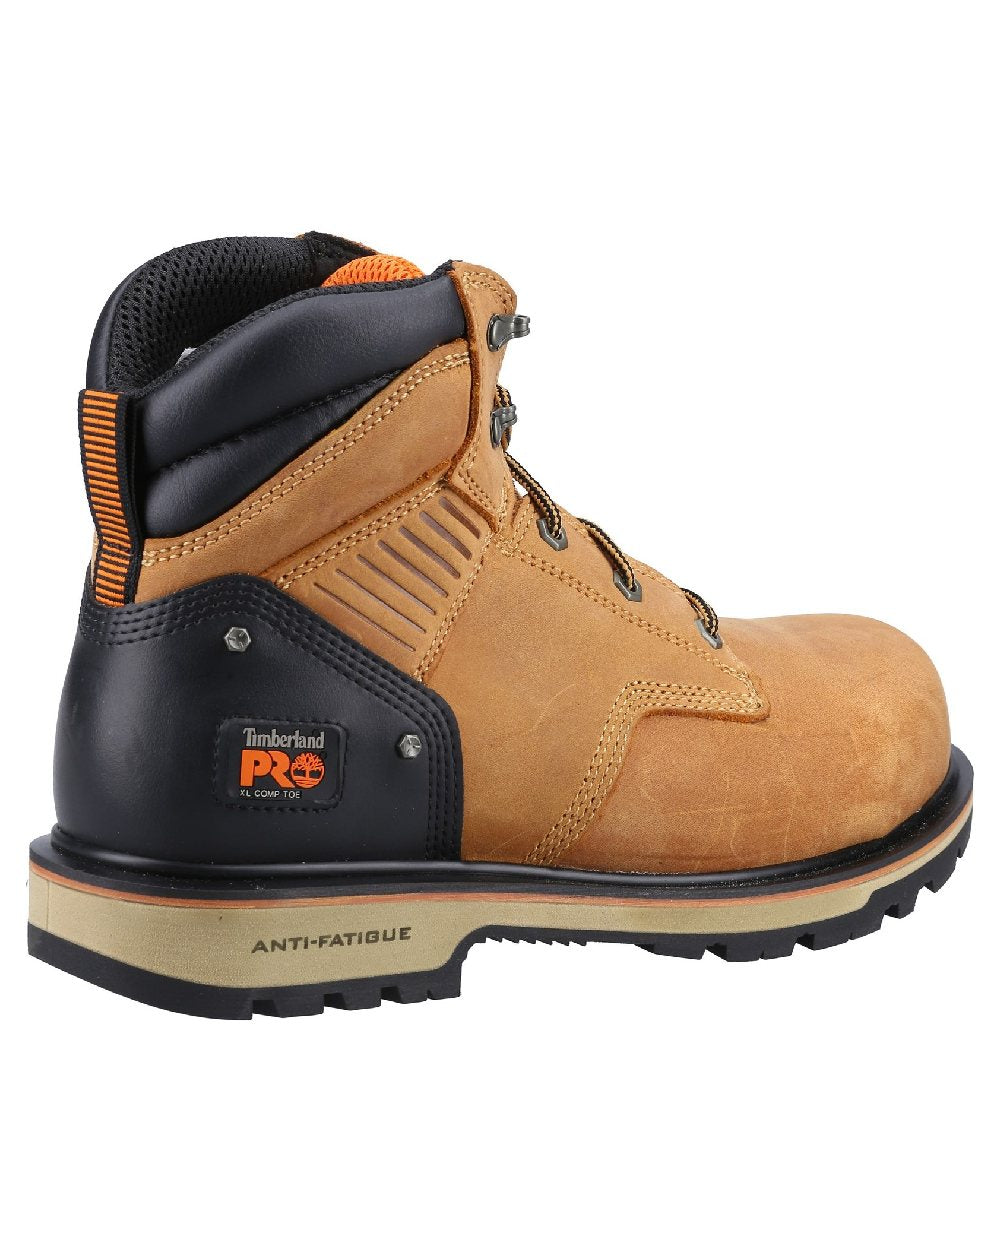 Honey coloured Timberland Pro Ballast Safety Boots on white background 